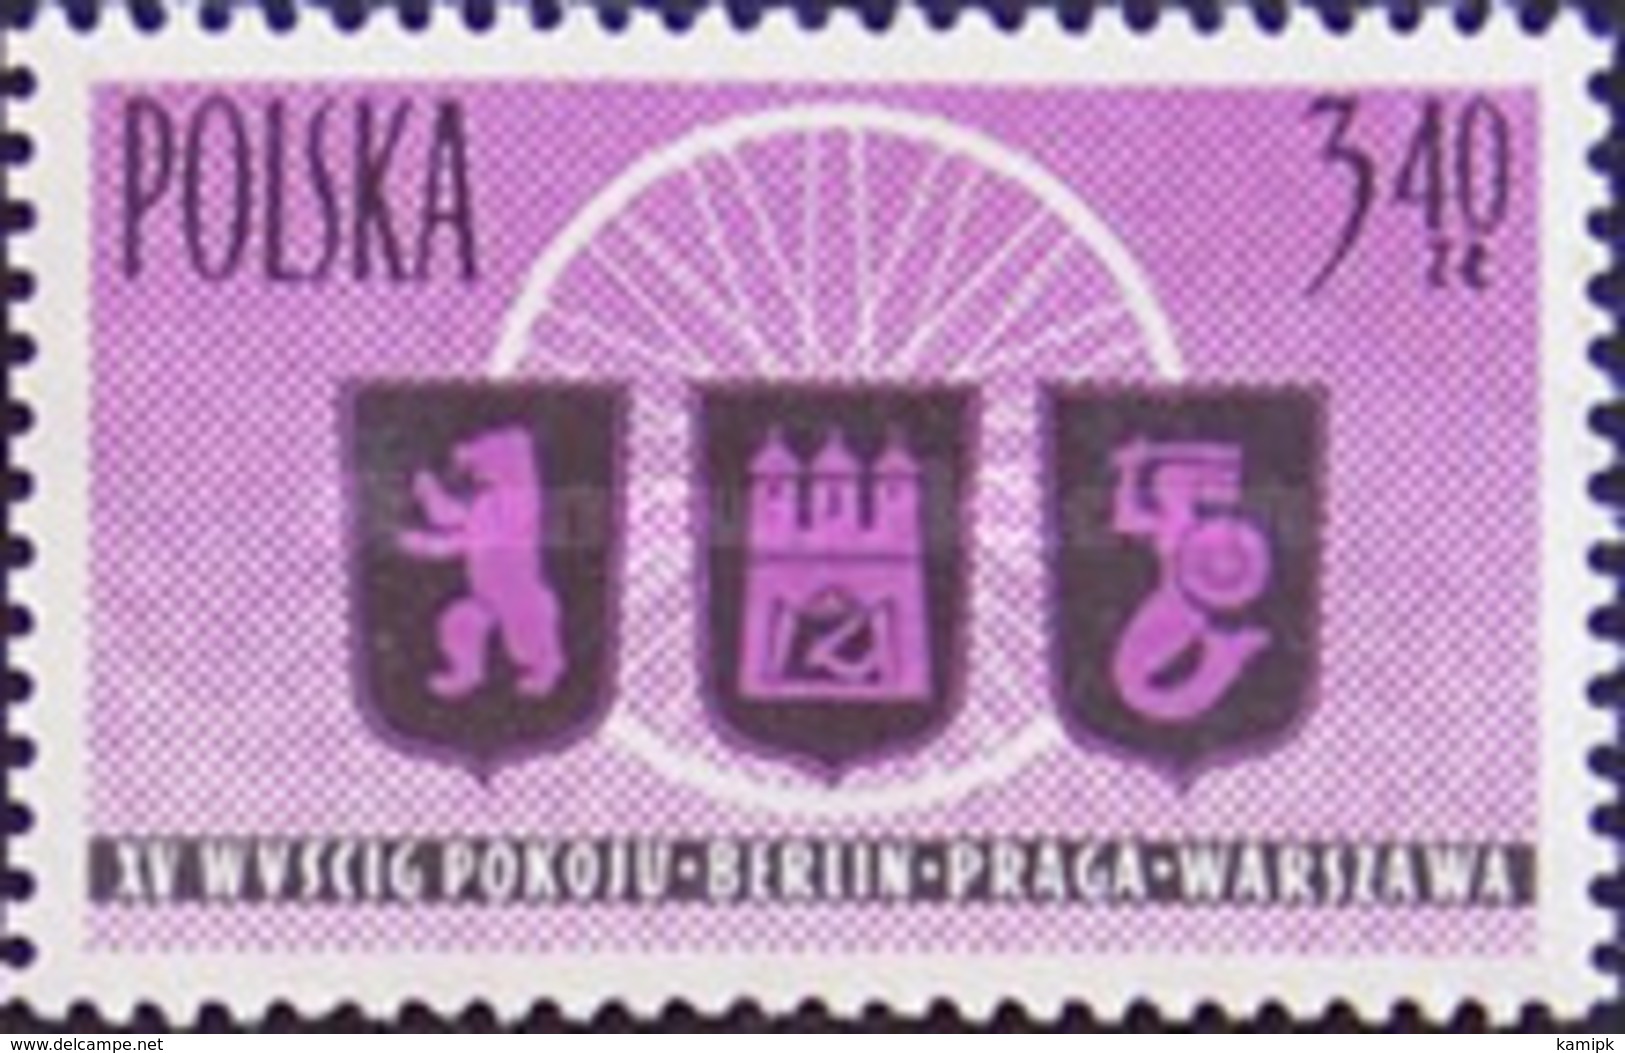 MH STAMPS Poland - The 15th International Bicycle Race For World Peace -1962 - Nuevos